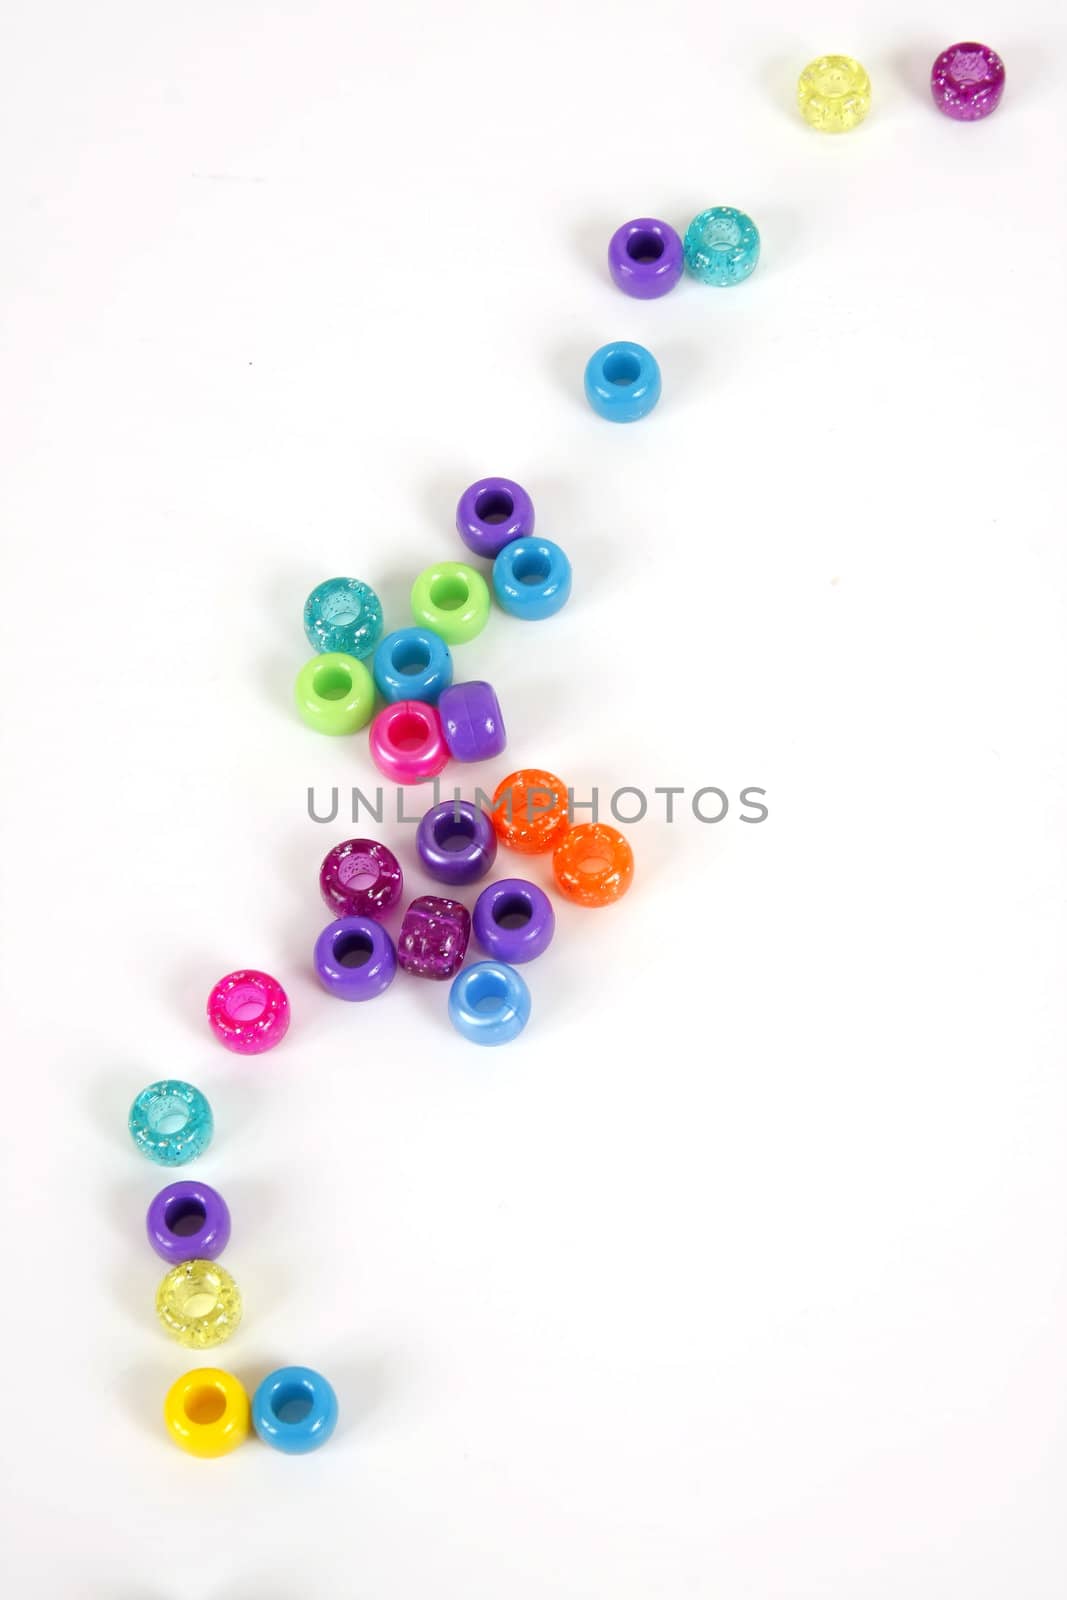 Colorful beads scattered on white background.